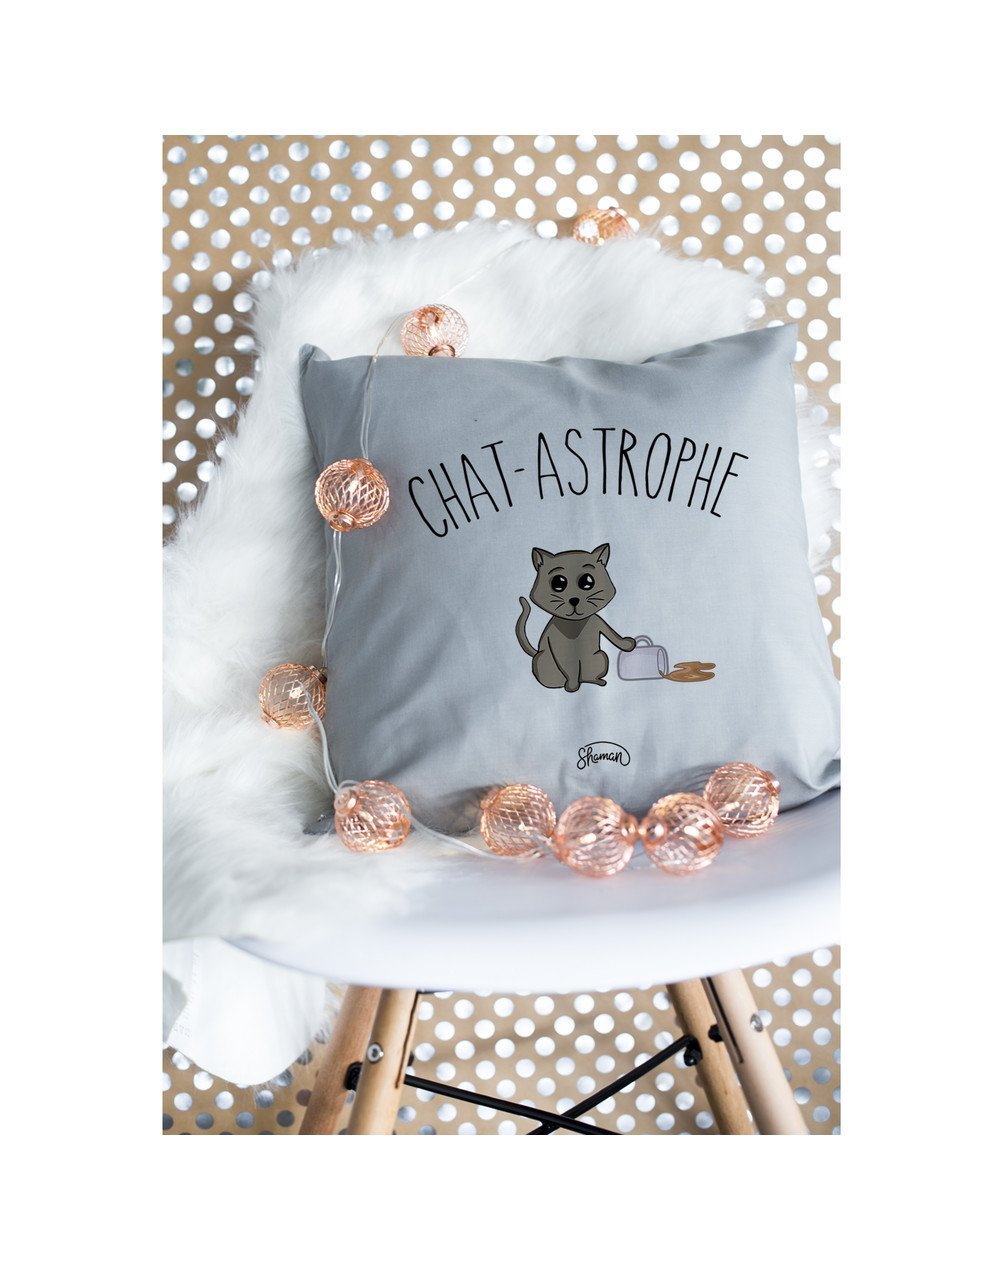 Coussin "Chat-astrophe"